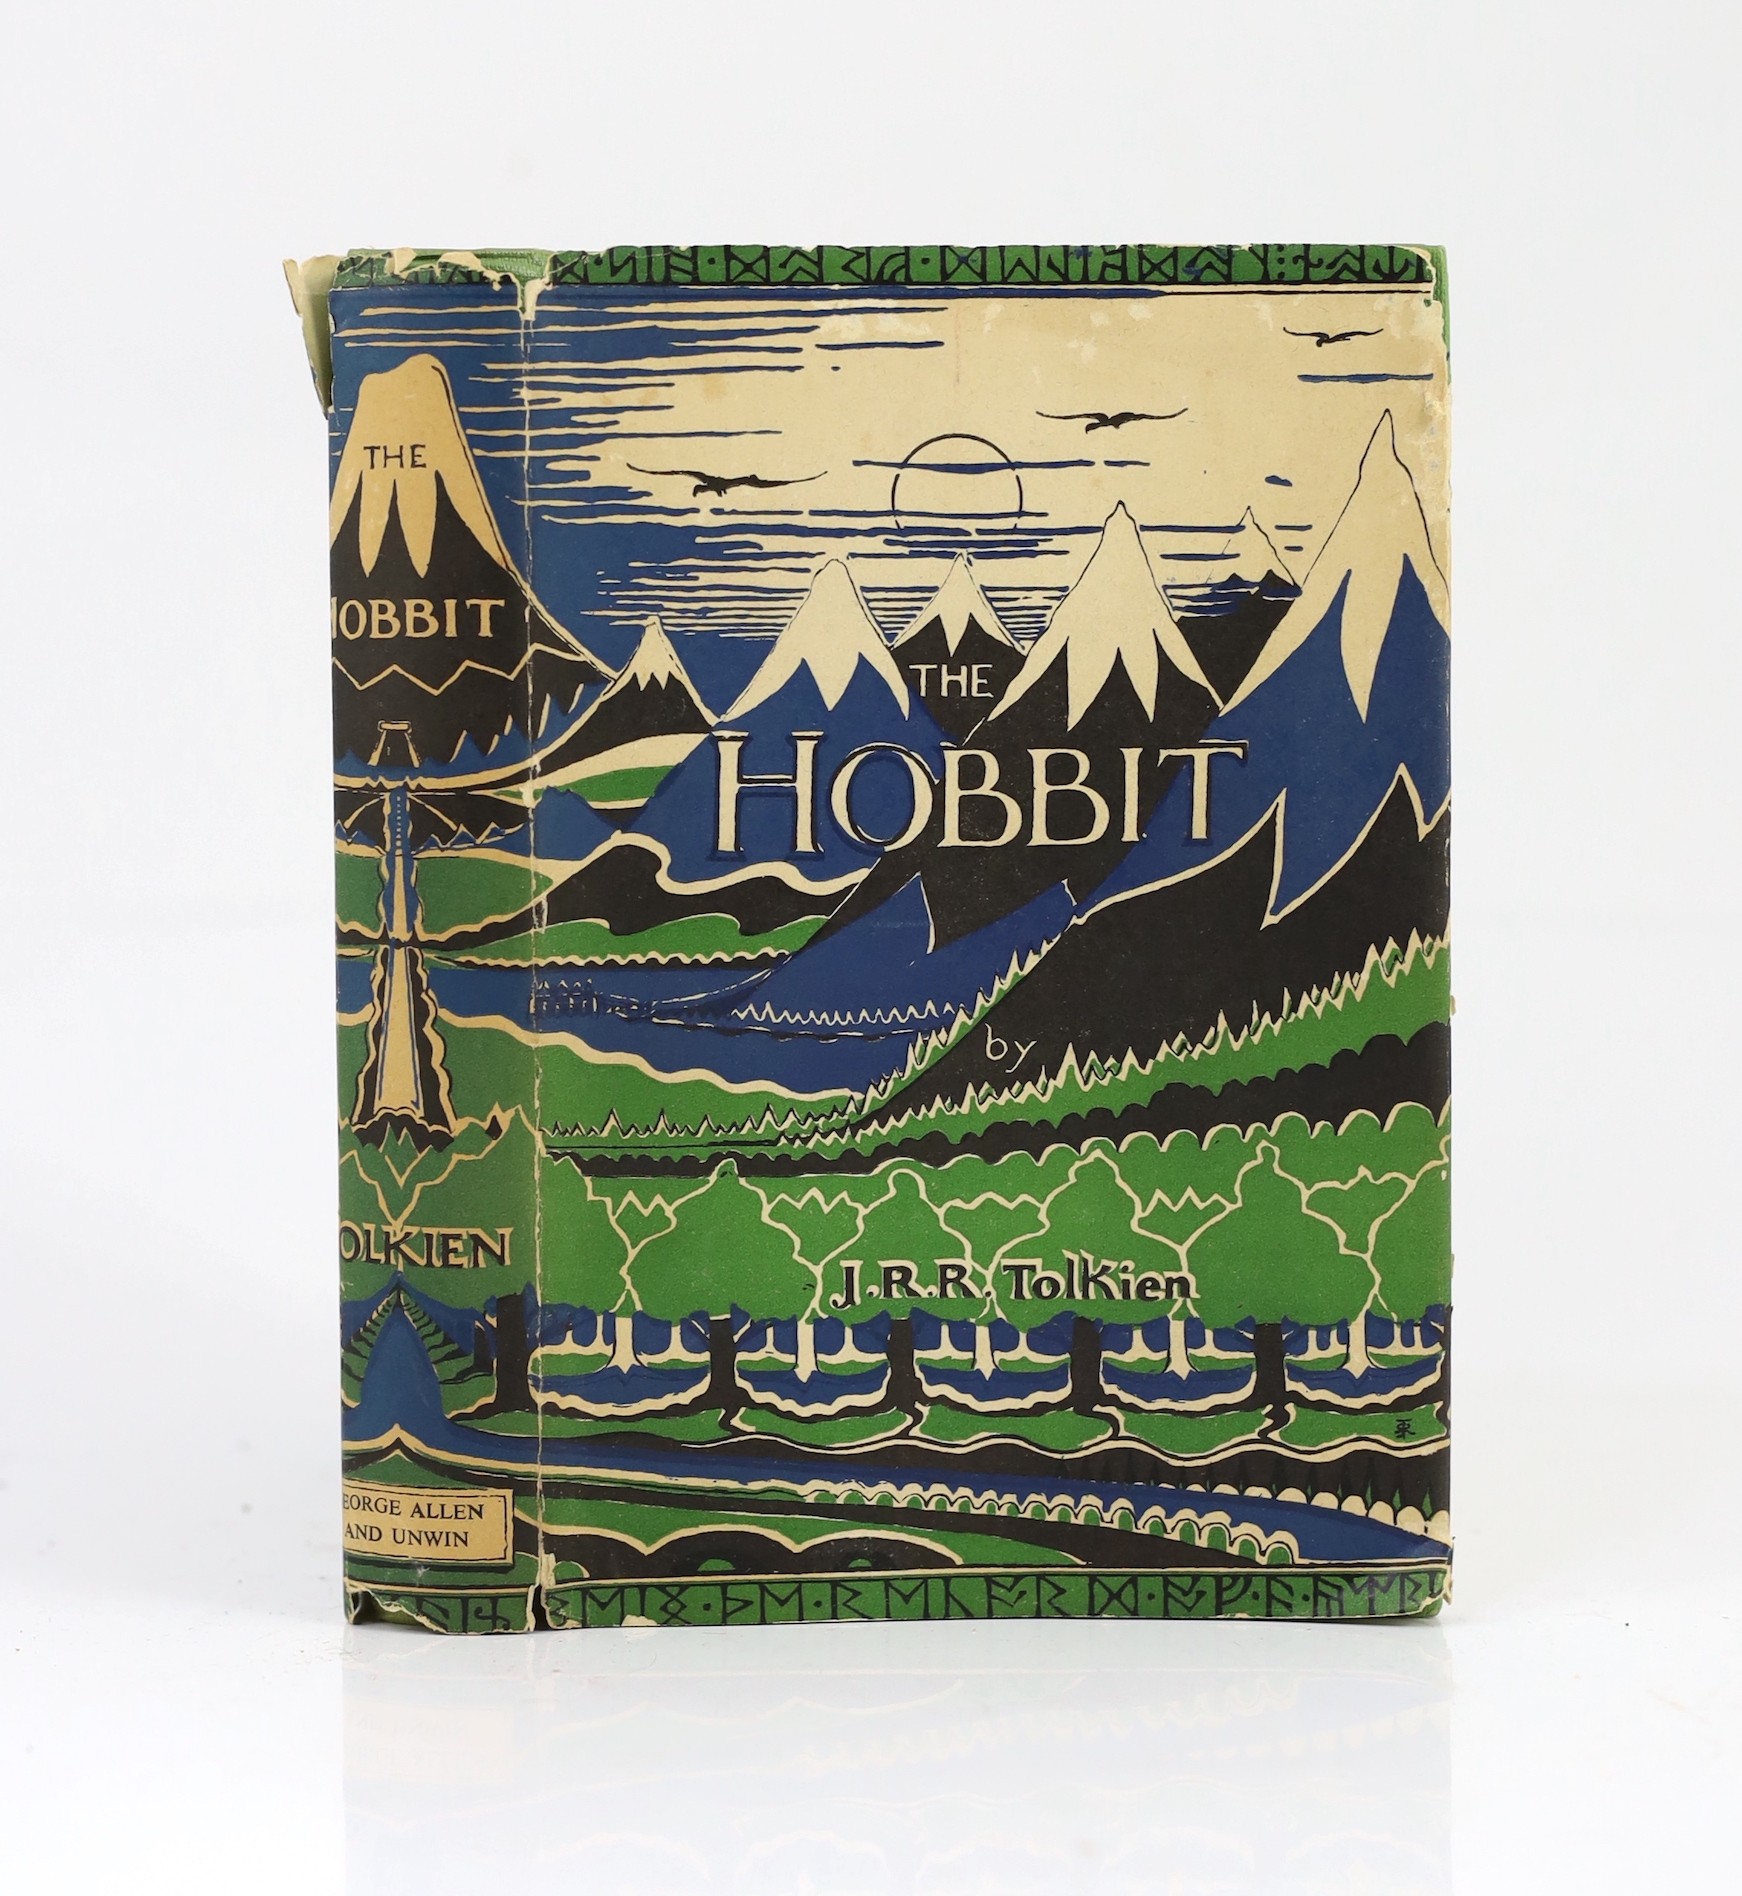 J.R.R. Tolkein - The Hobbit or There and Back Again, 2nd edition, 10th impression, (overall). coloured frontis. and 8 text illus. (7 full-page, by the author), 2 maps (in red and black) on e/ps.; publisher's pictorial cl